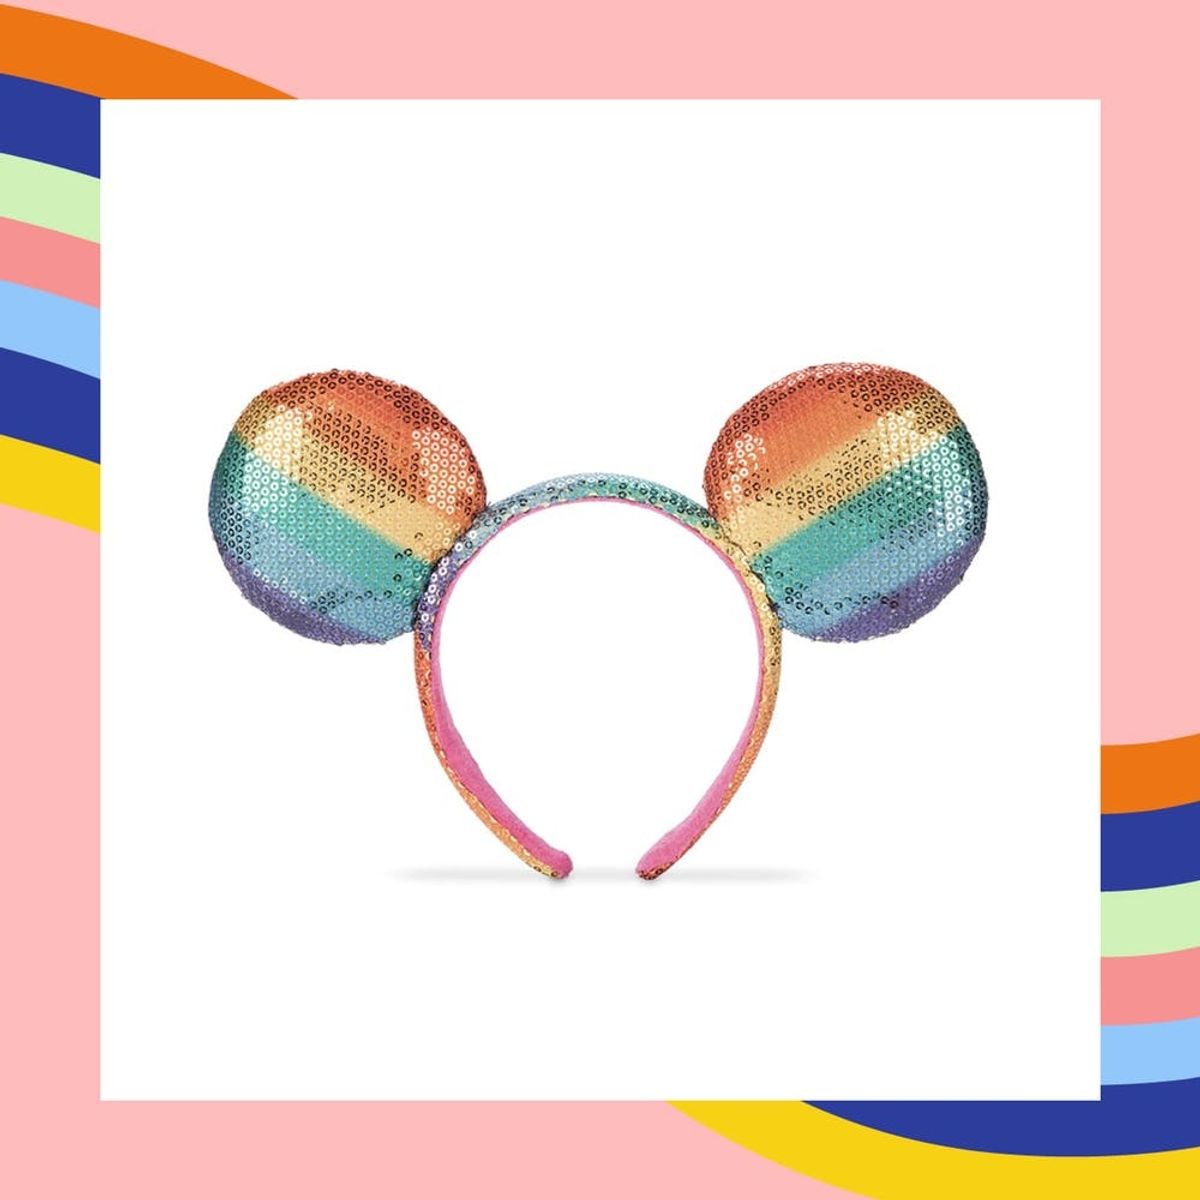 Disney’s Rainbow Collection for Pride Month Is All Sorts of Magical